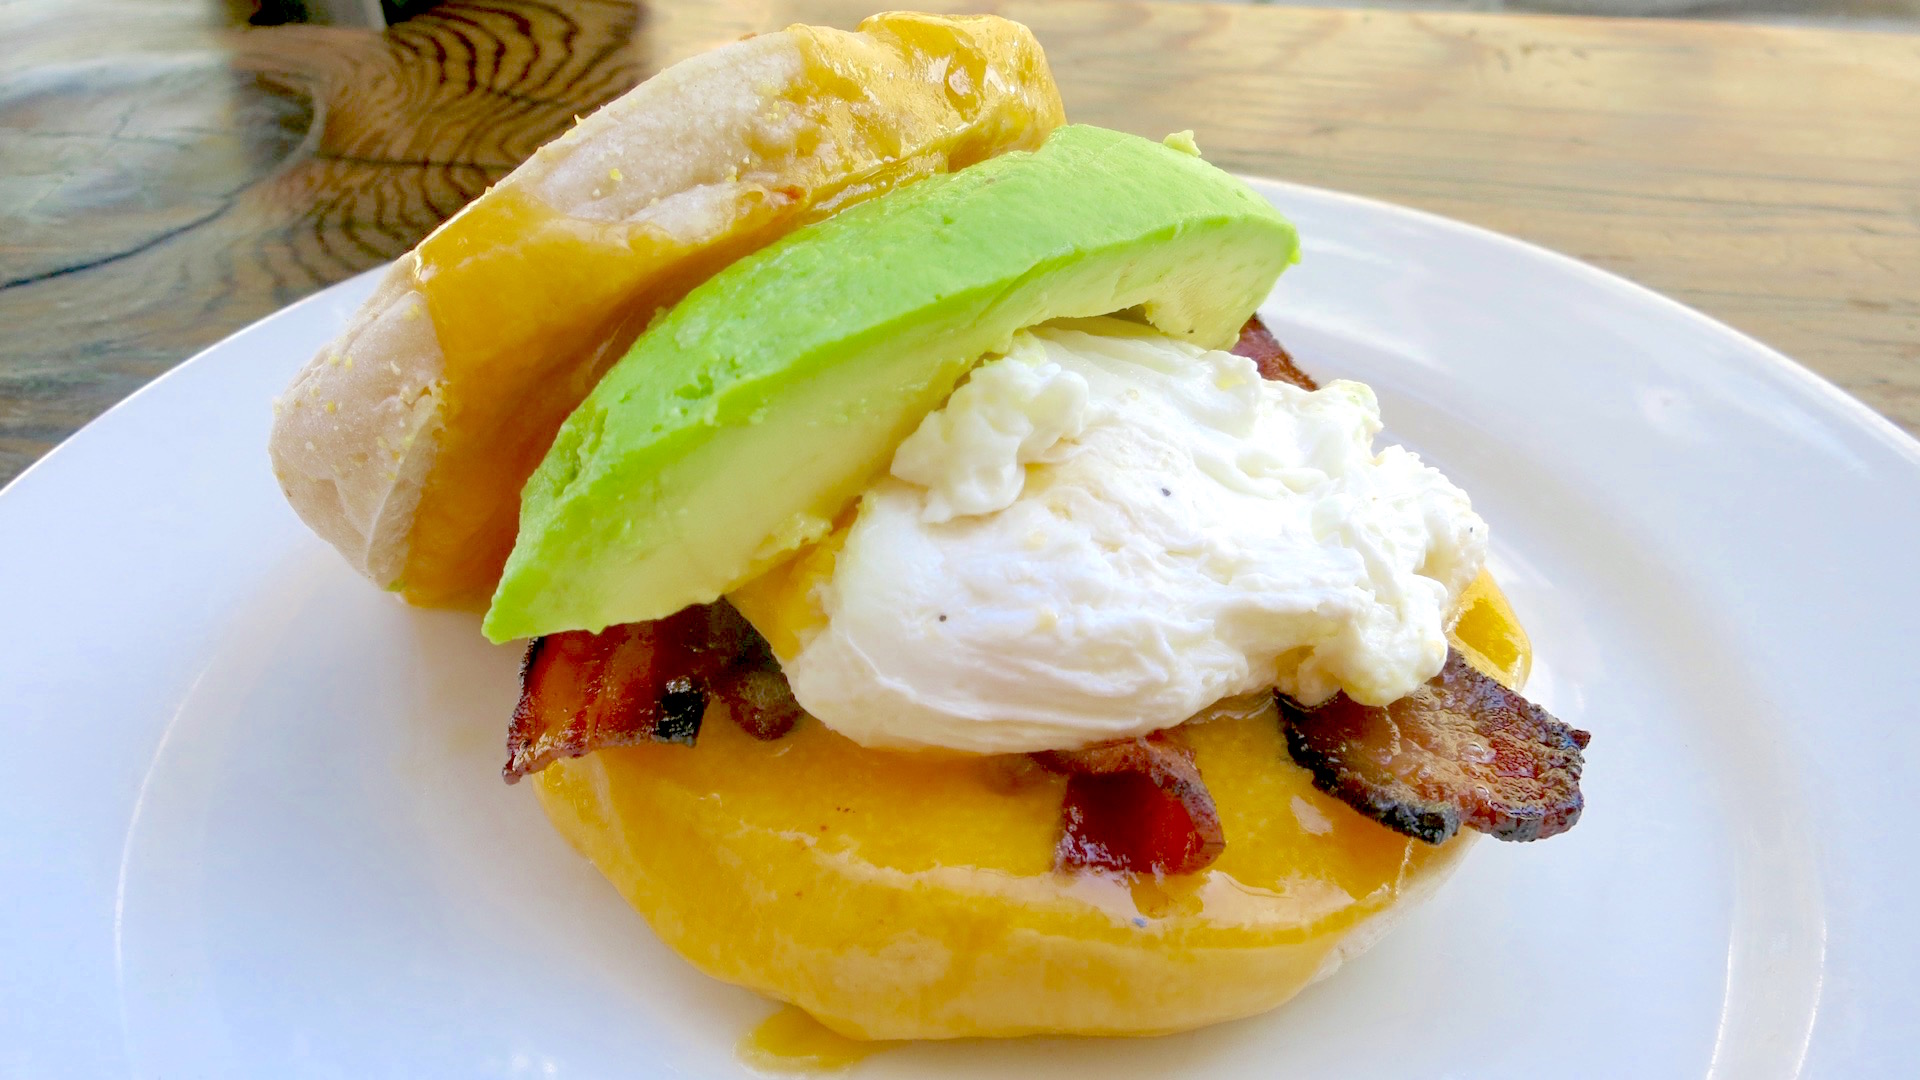 You get more bang for your buck with Chop Bar's version of the Egg McMuffin.